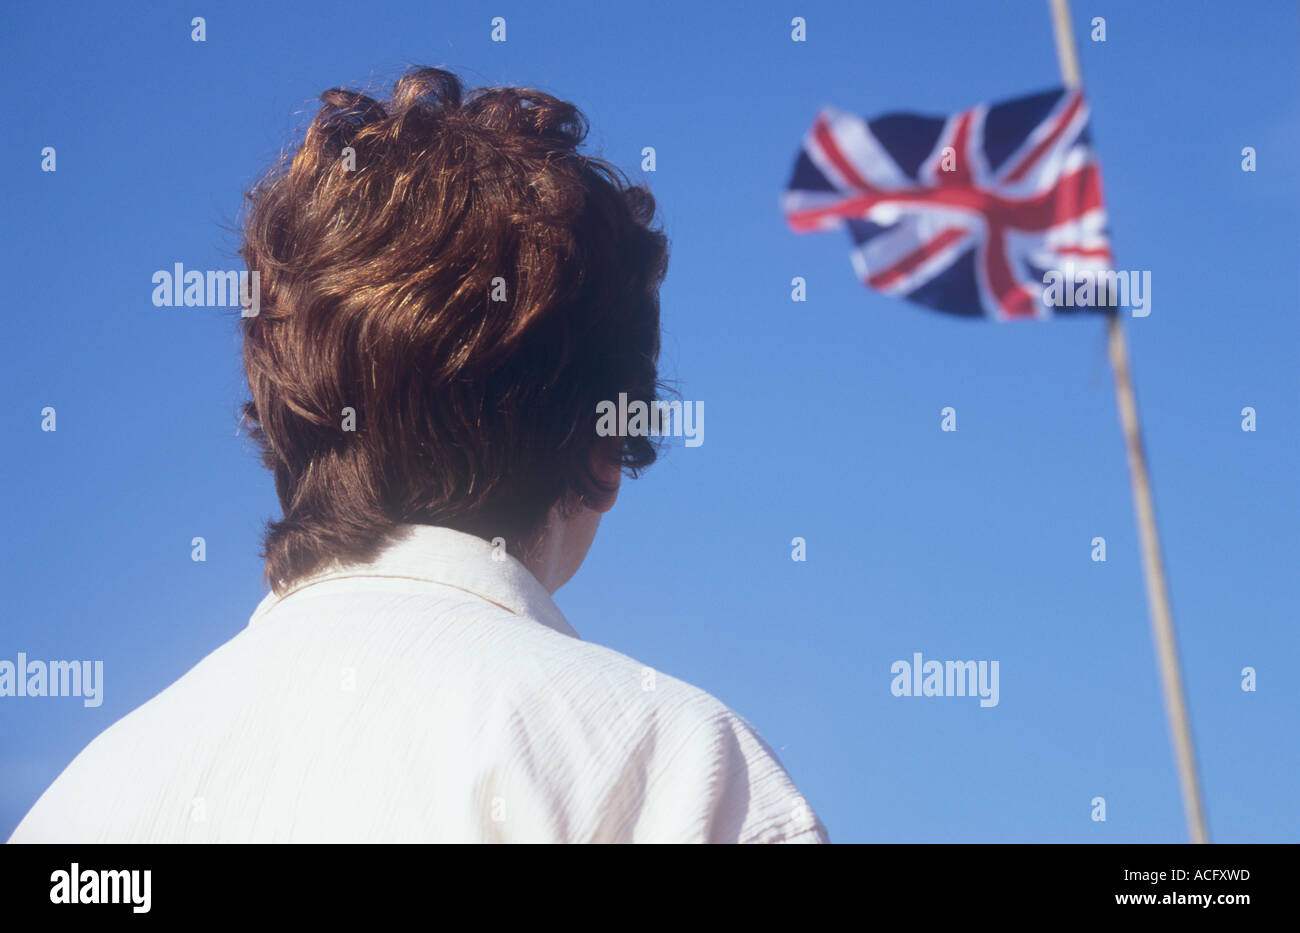 Backview of head of female figure in cream shirt gazing up at a distant Union Jack flag fluttering in a strong breeze Stock Photo